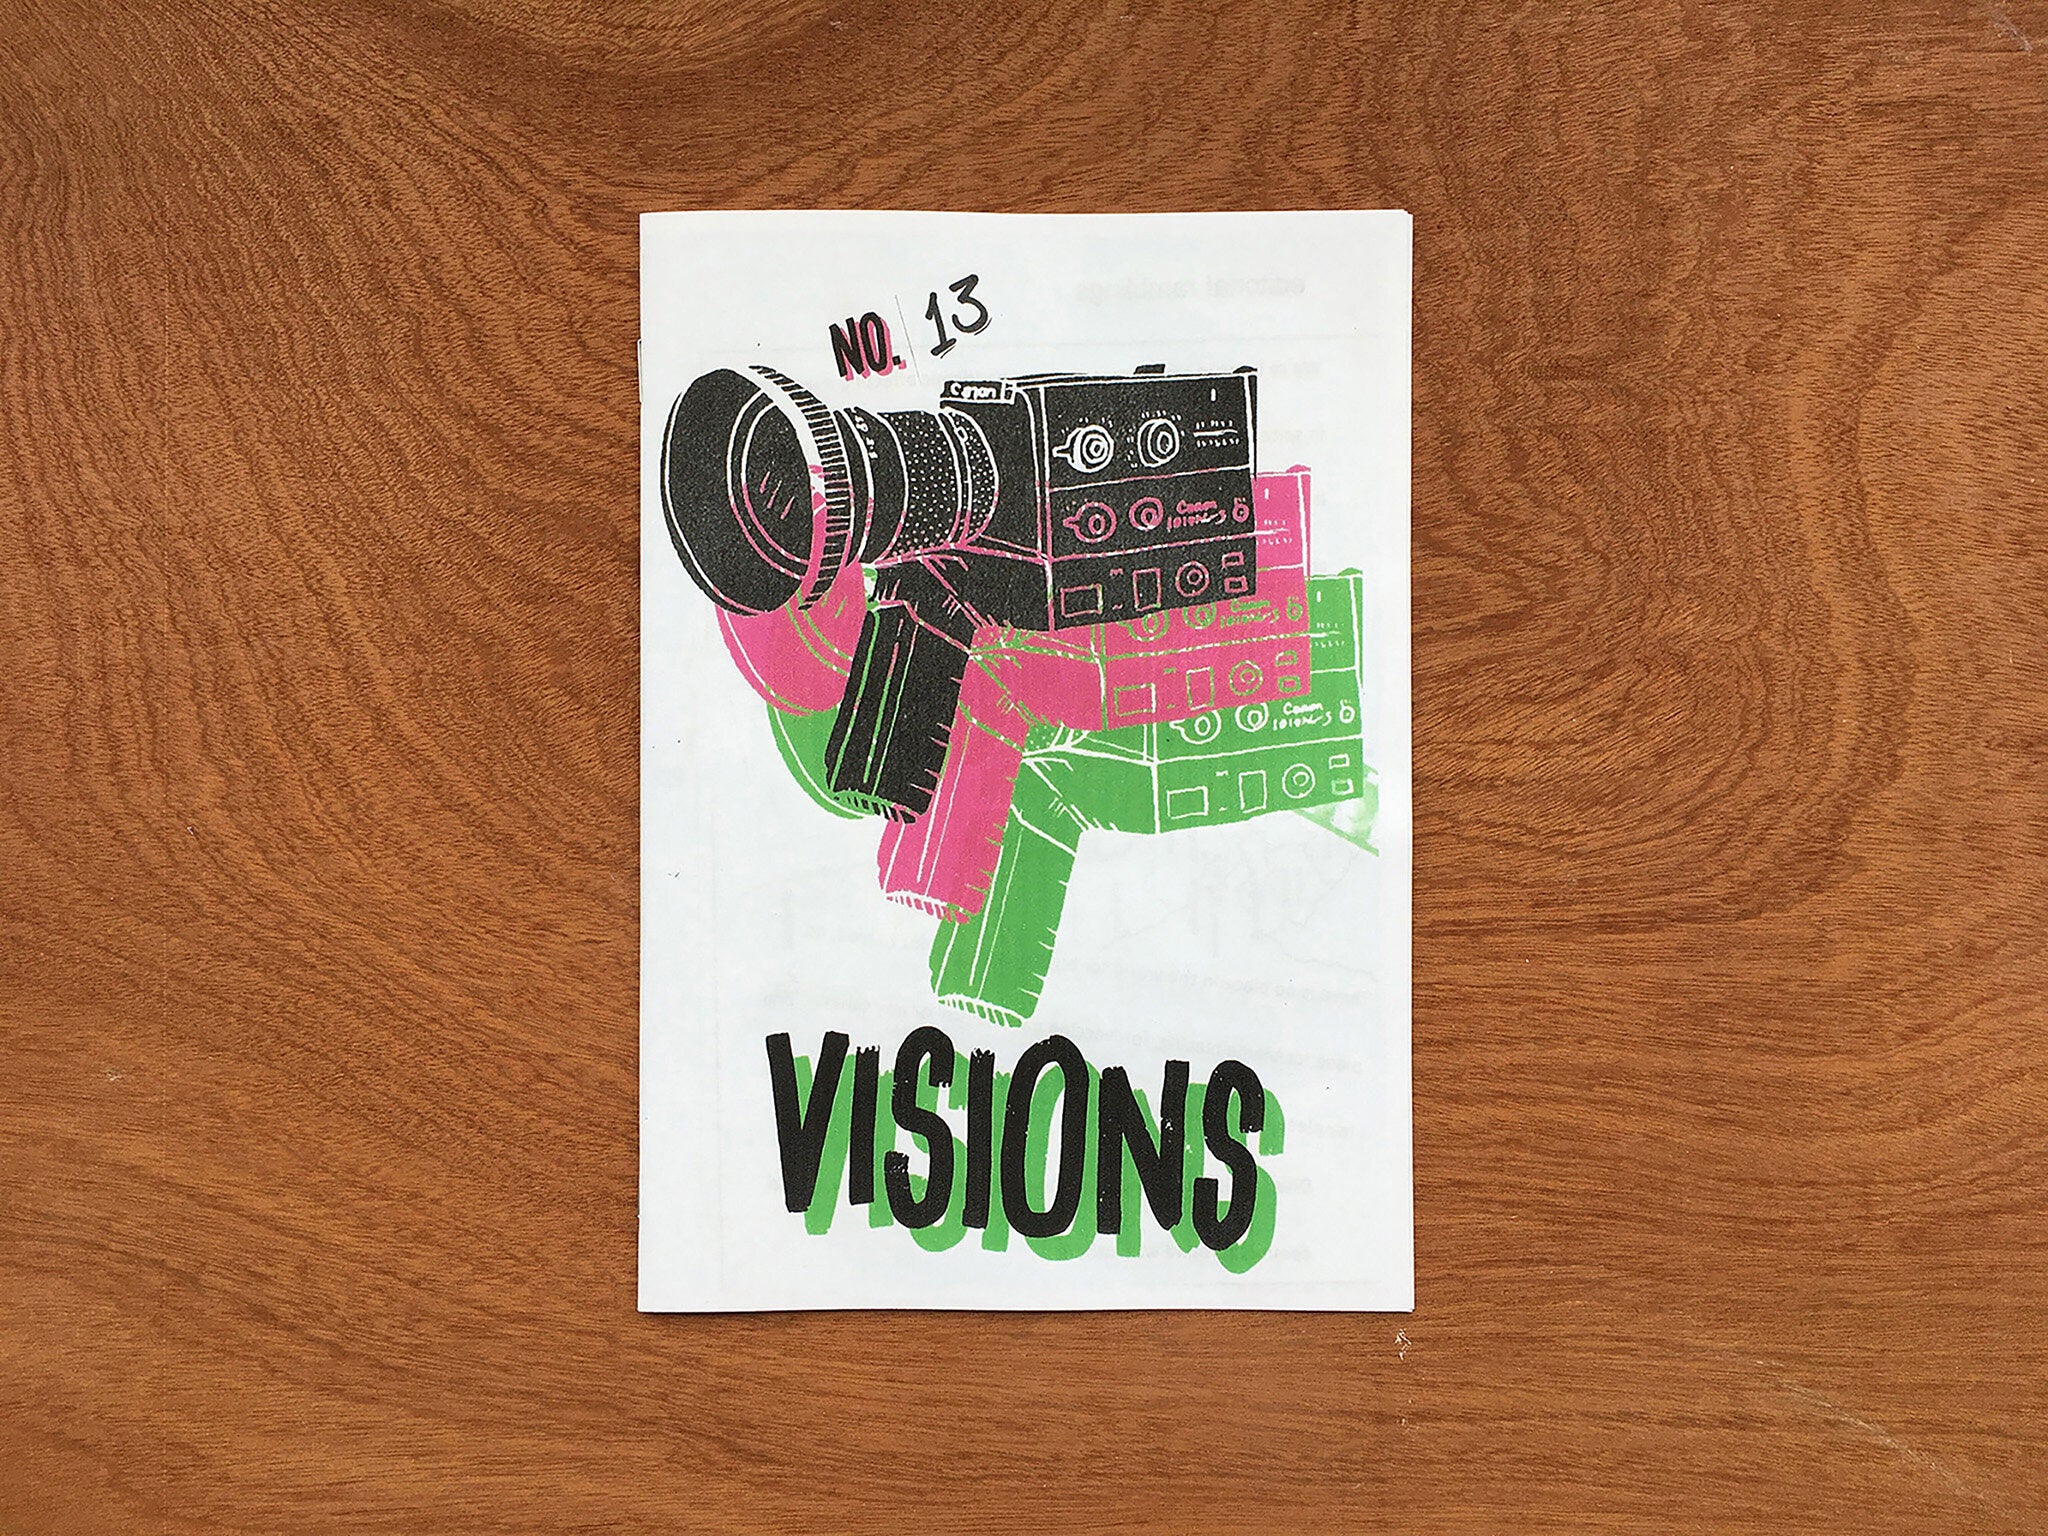 VISIONS #13 by Dave Emmerson